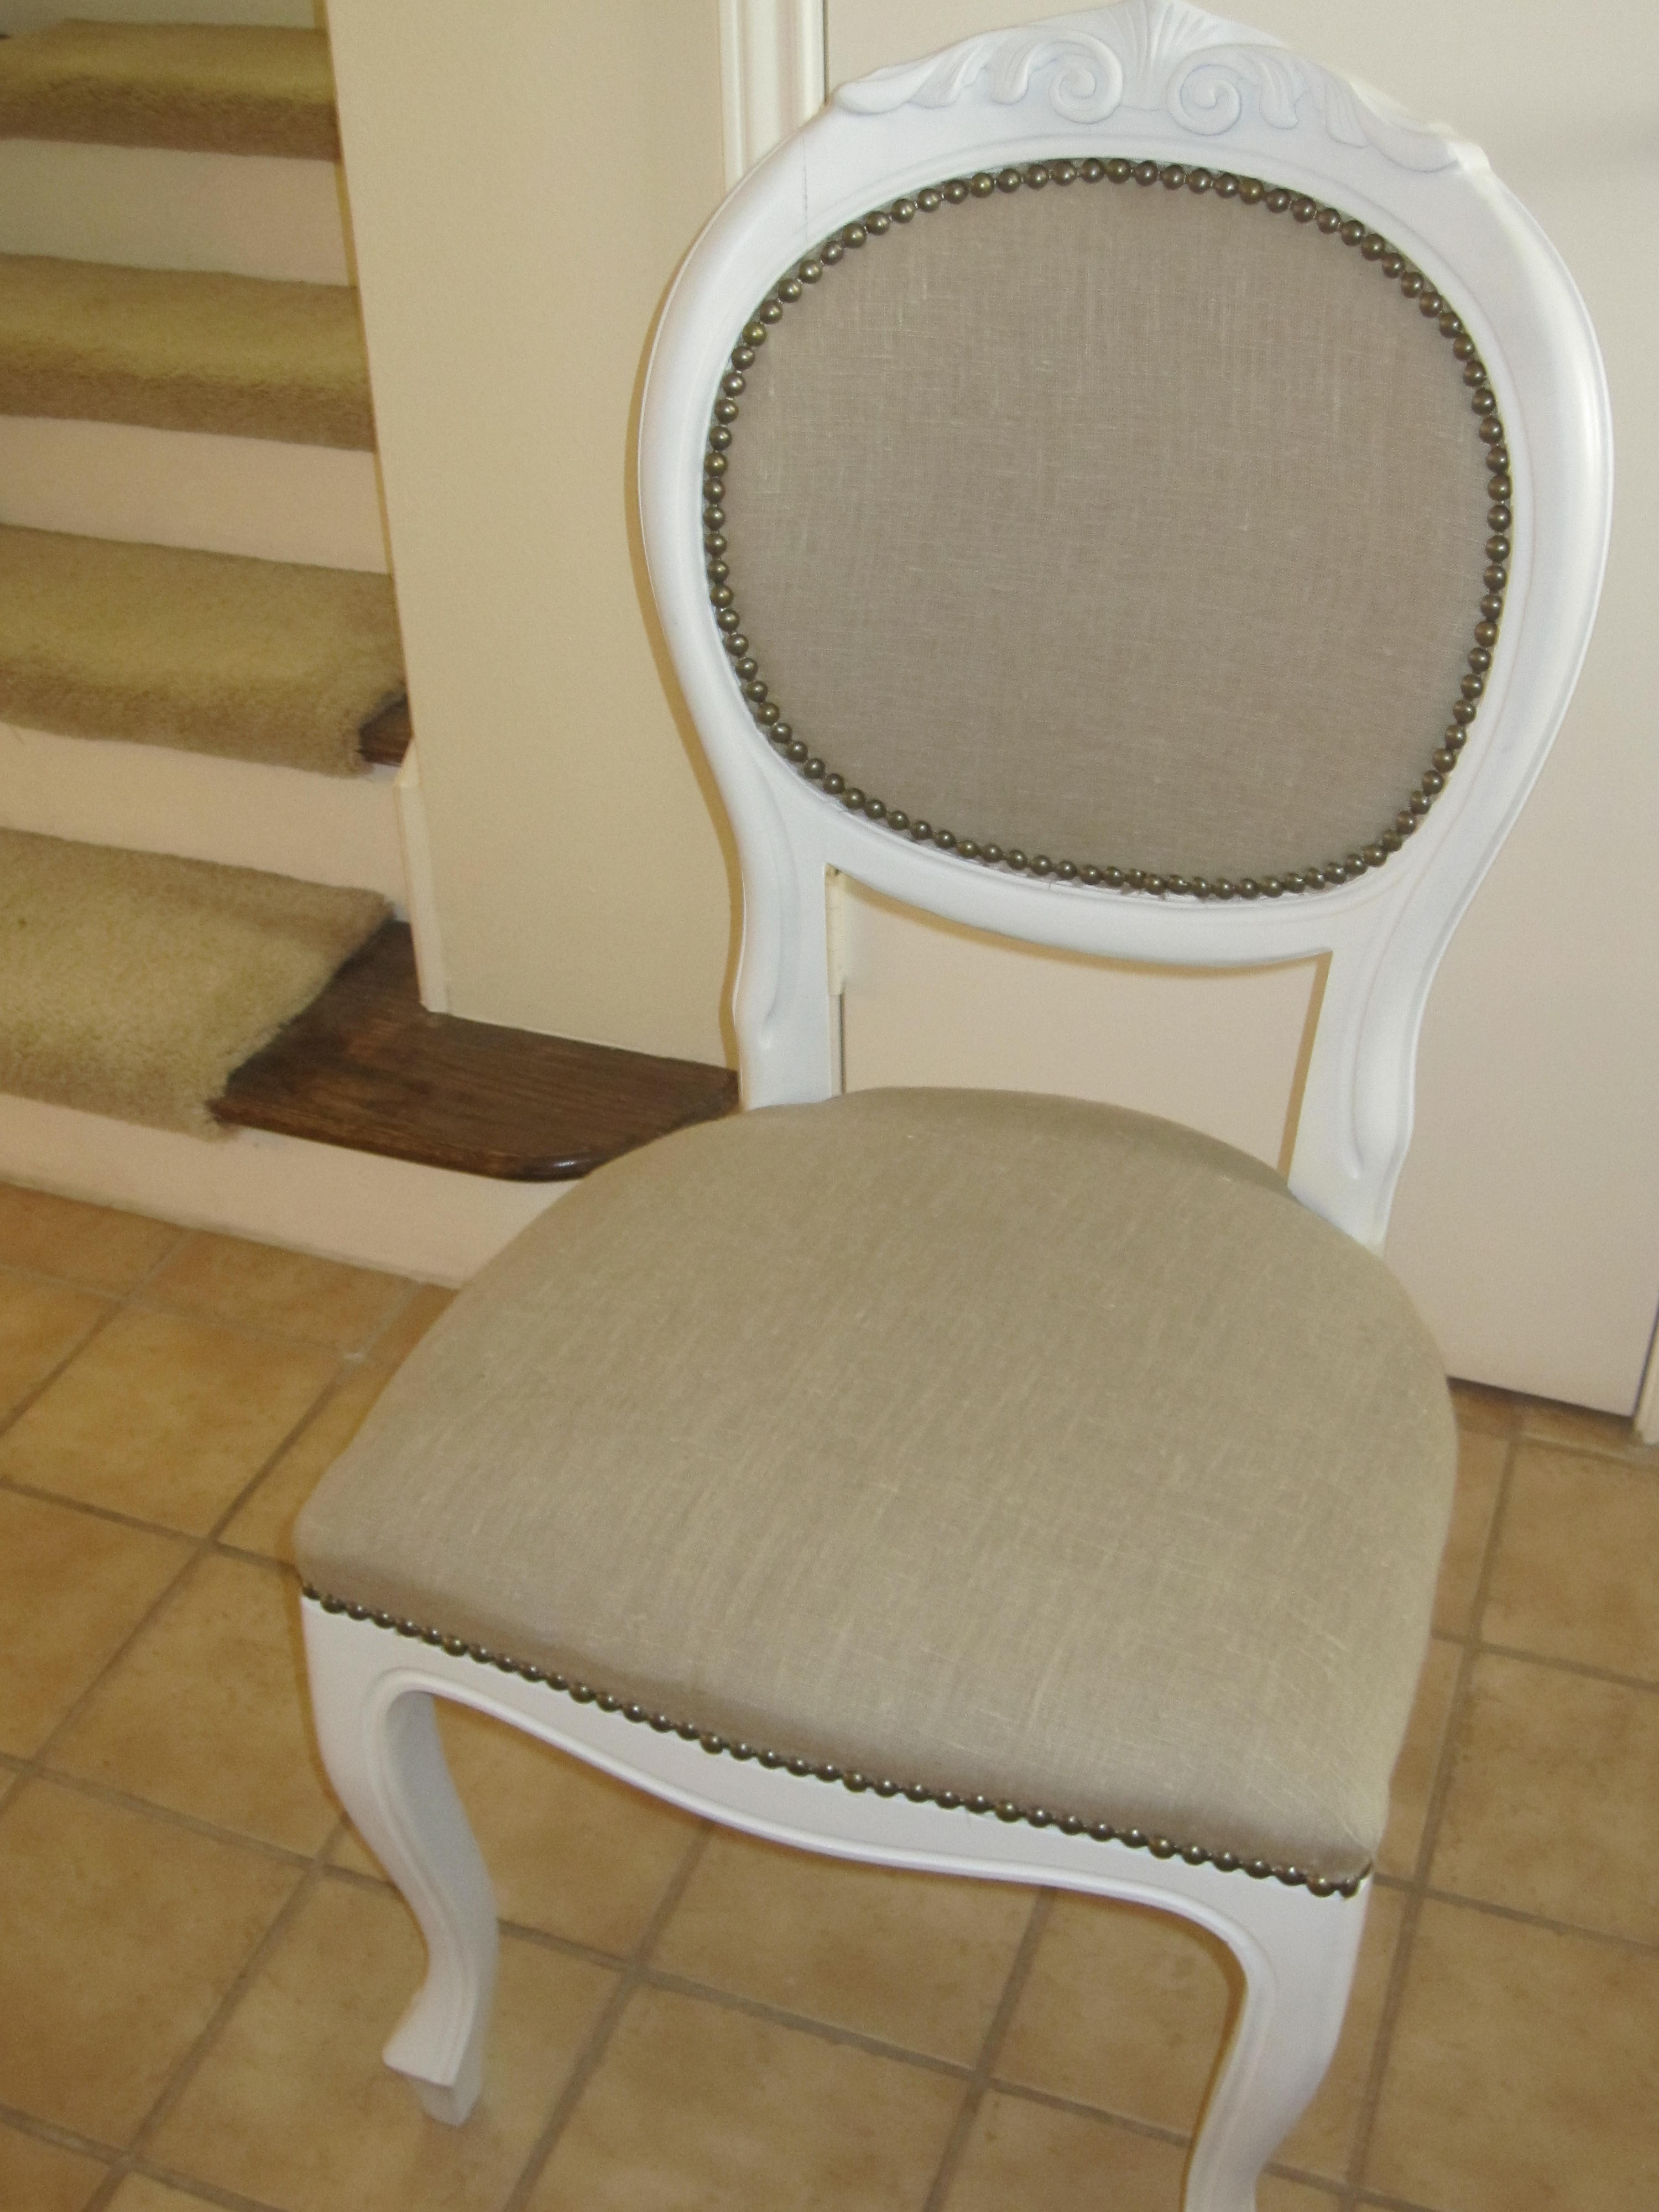 HOW TO COVER A DINING ROOM CHAIR WITH MATERIAL – Chair Pads & Cushions